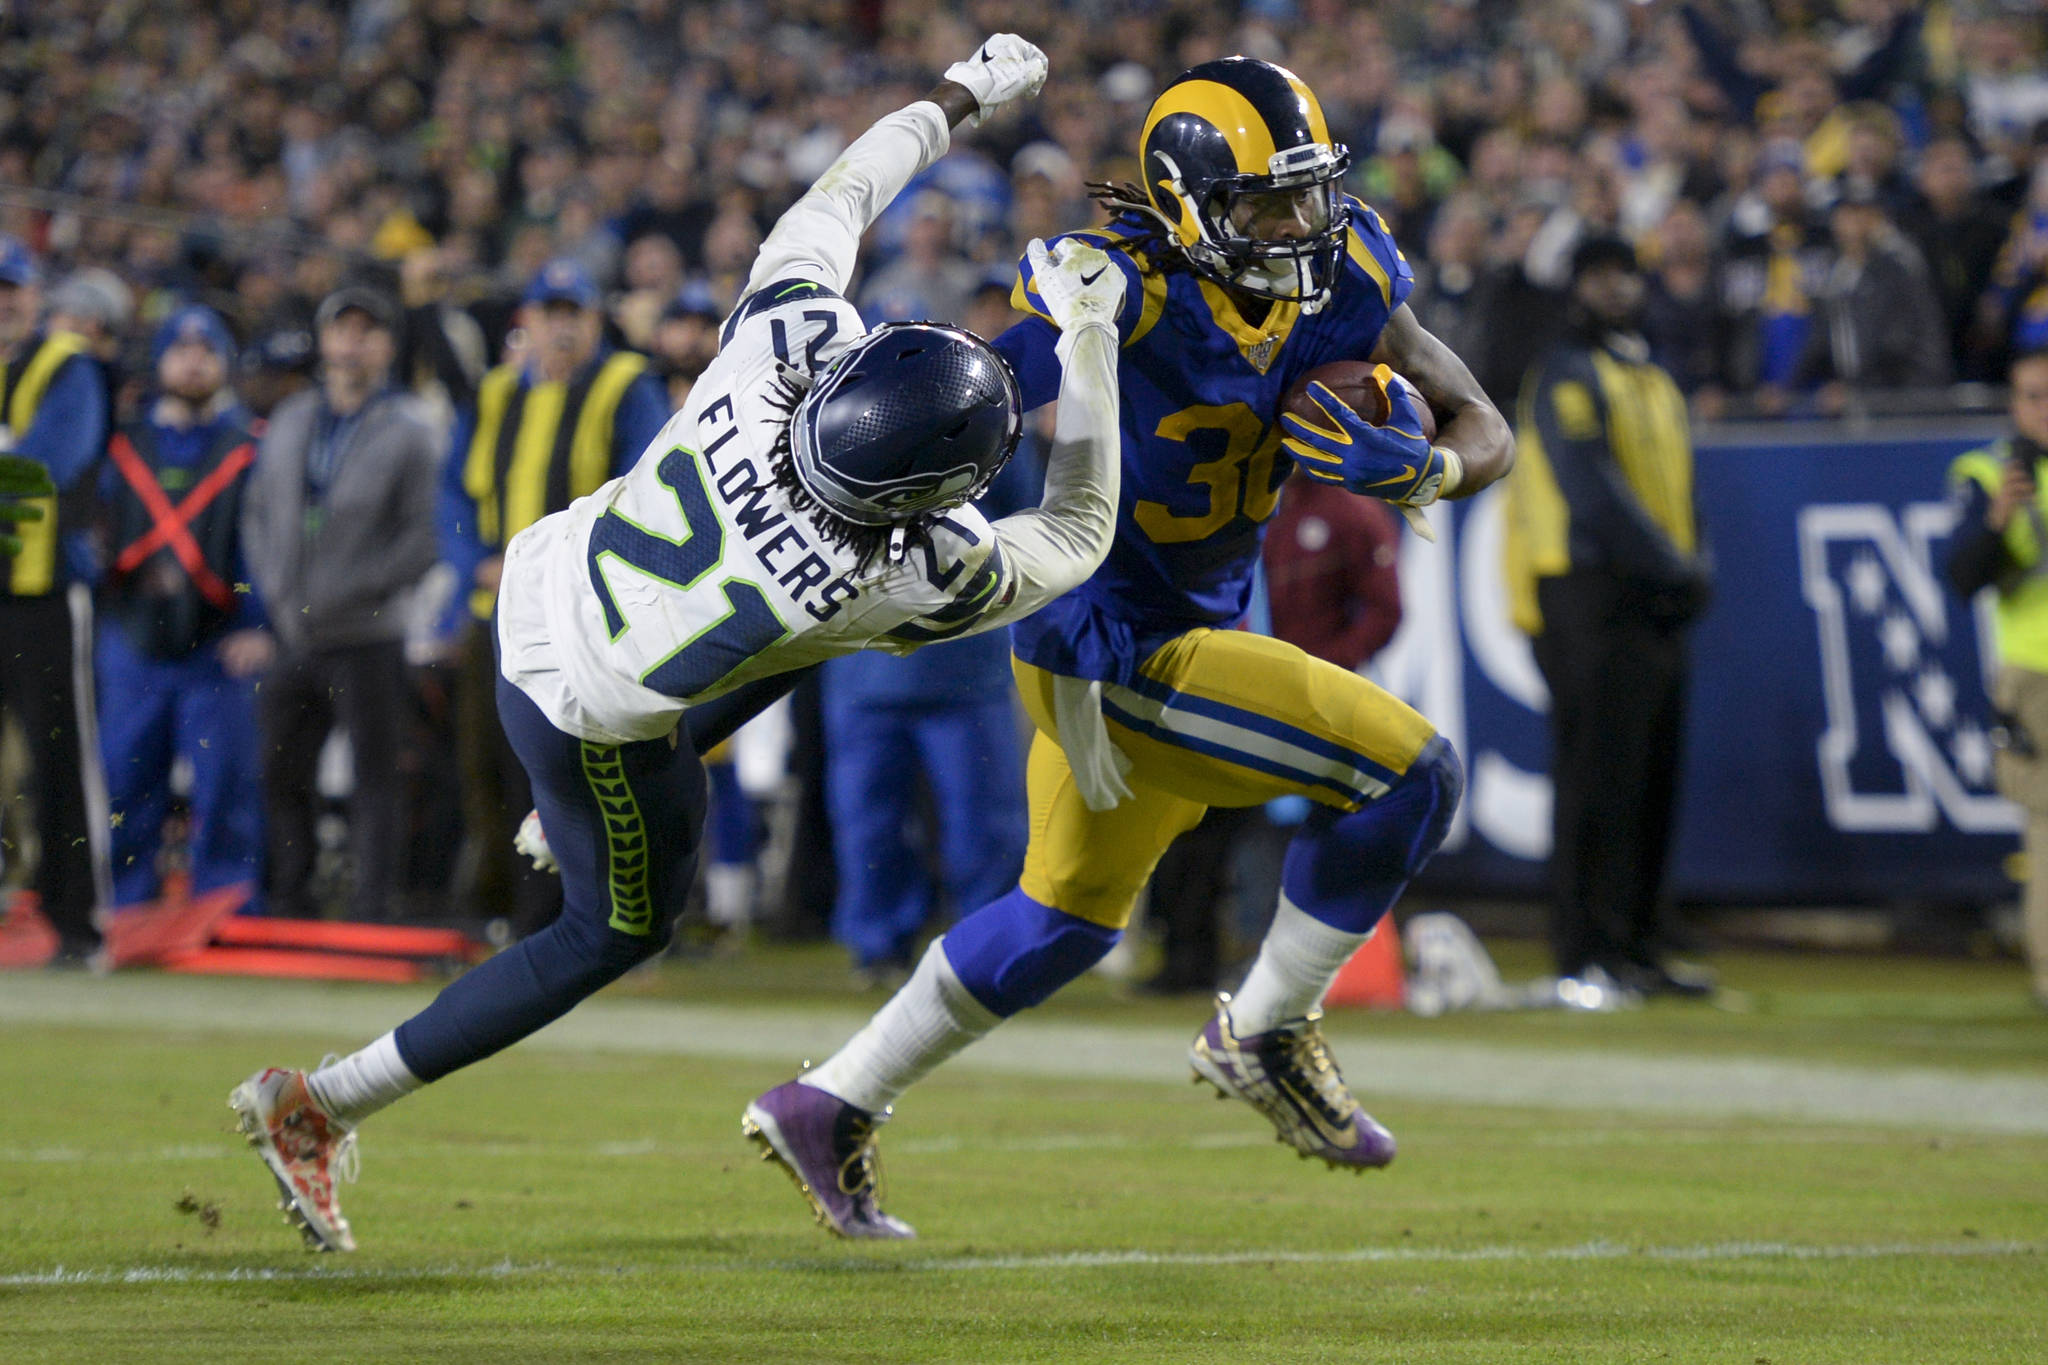 Los Angeles Rams running back Todd Gurley stiff arms Seahawks cornerback Tre Flowers as he runs for a touchdown in the second half of Sunday night’s game in Los Angeles. (Kyusung Gong / Associated Press)